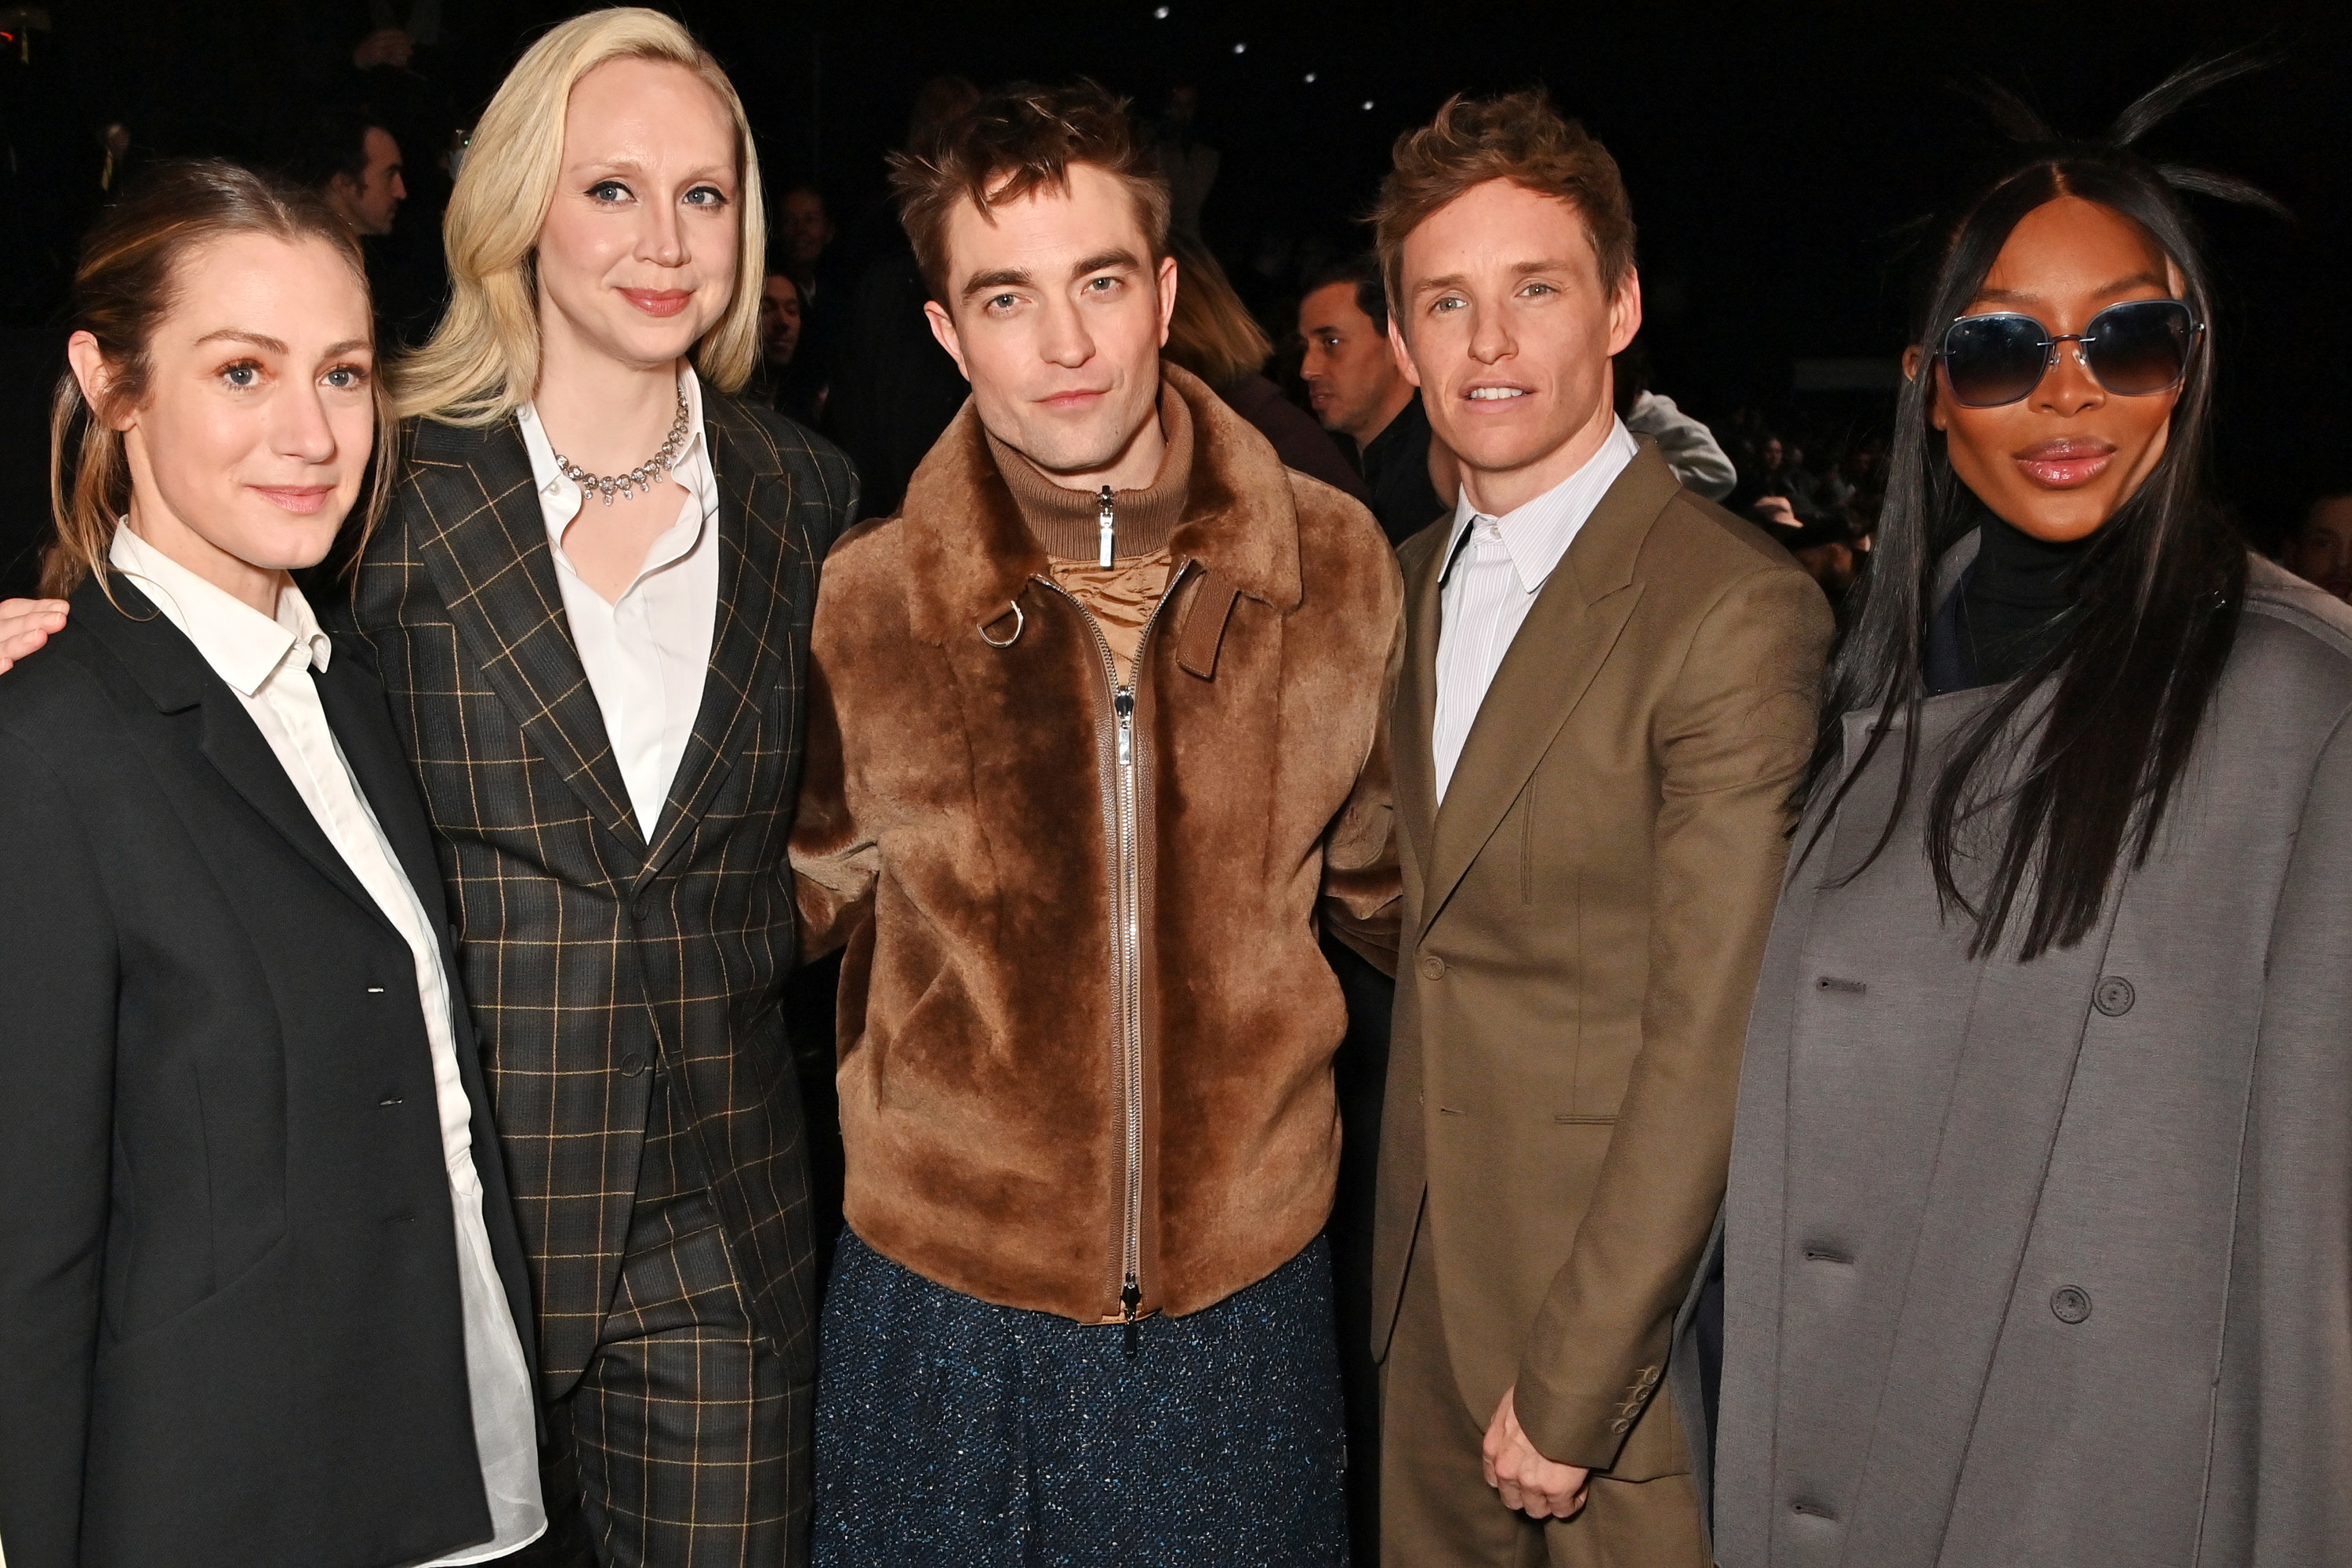 Robert posing for a photo with Eddie, Naomi Campbell, and Gwendoline Christie